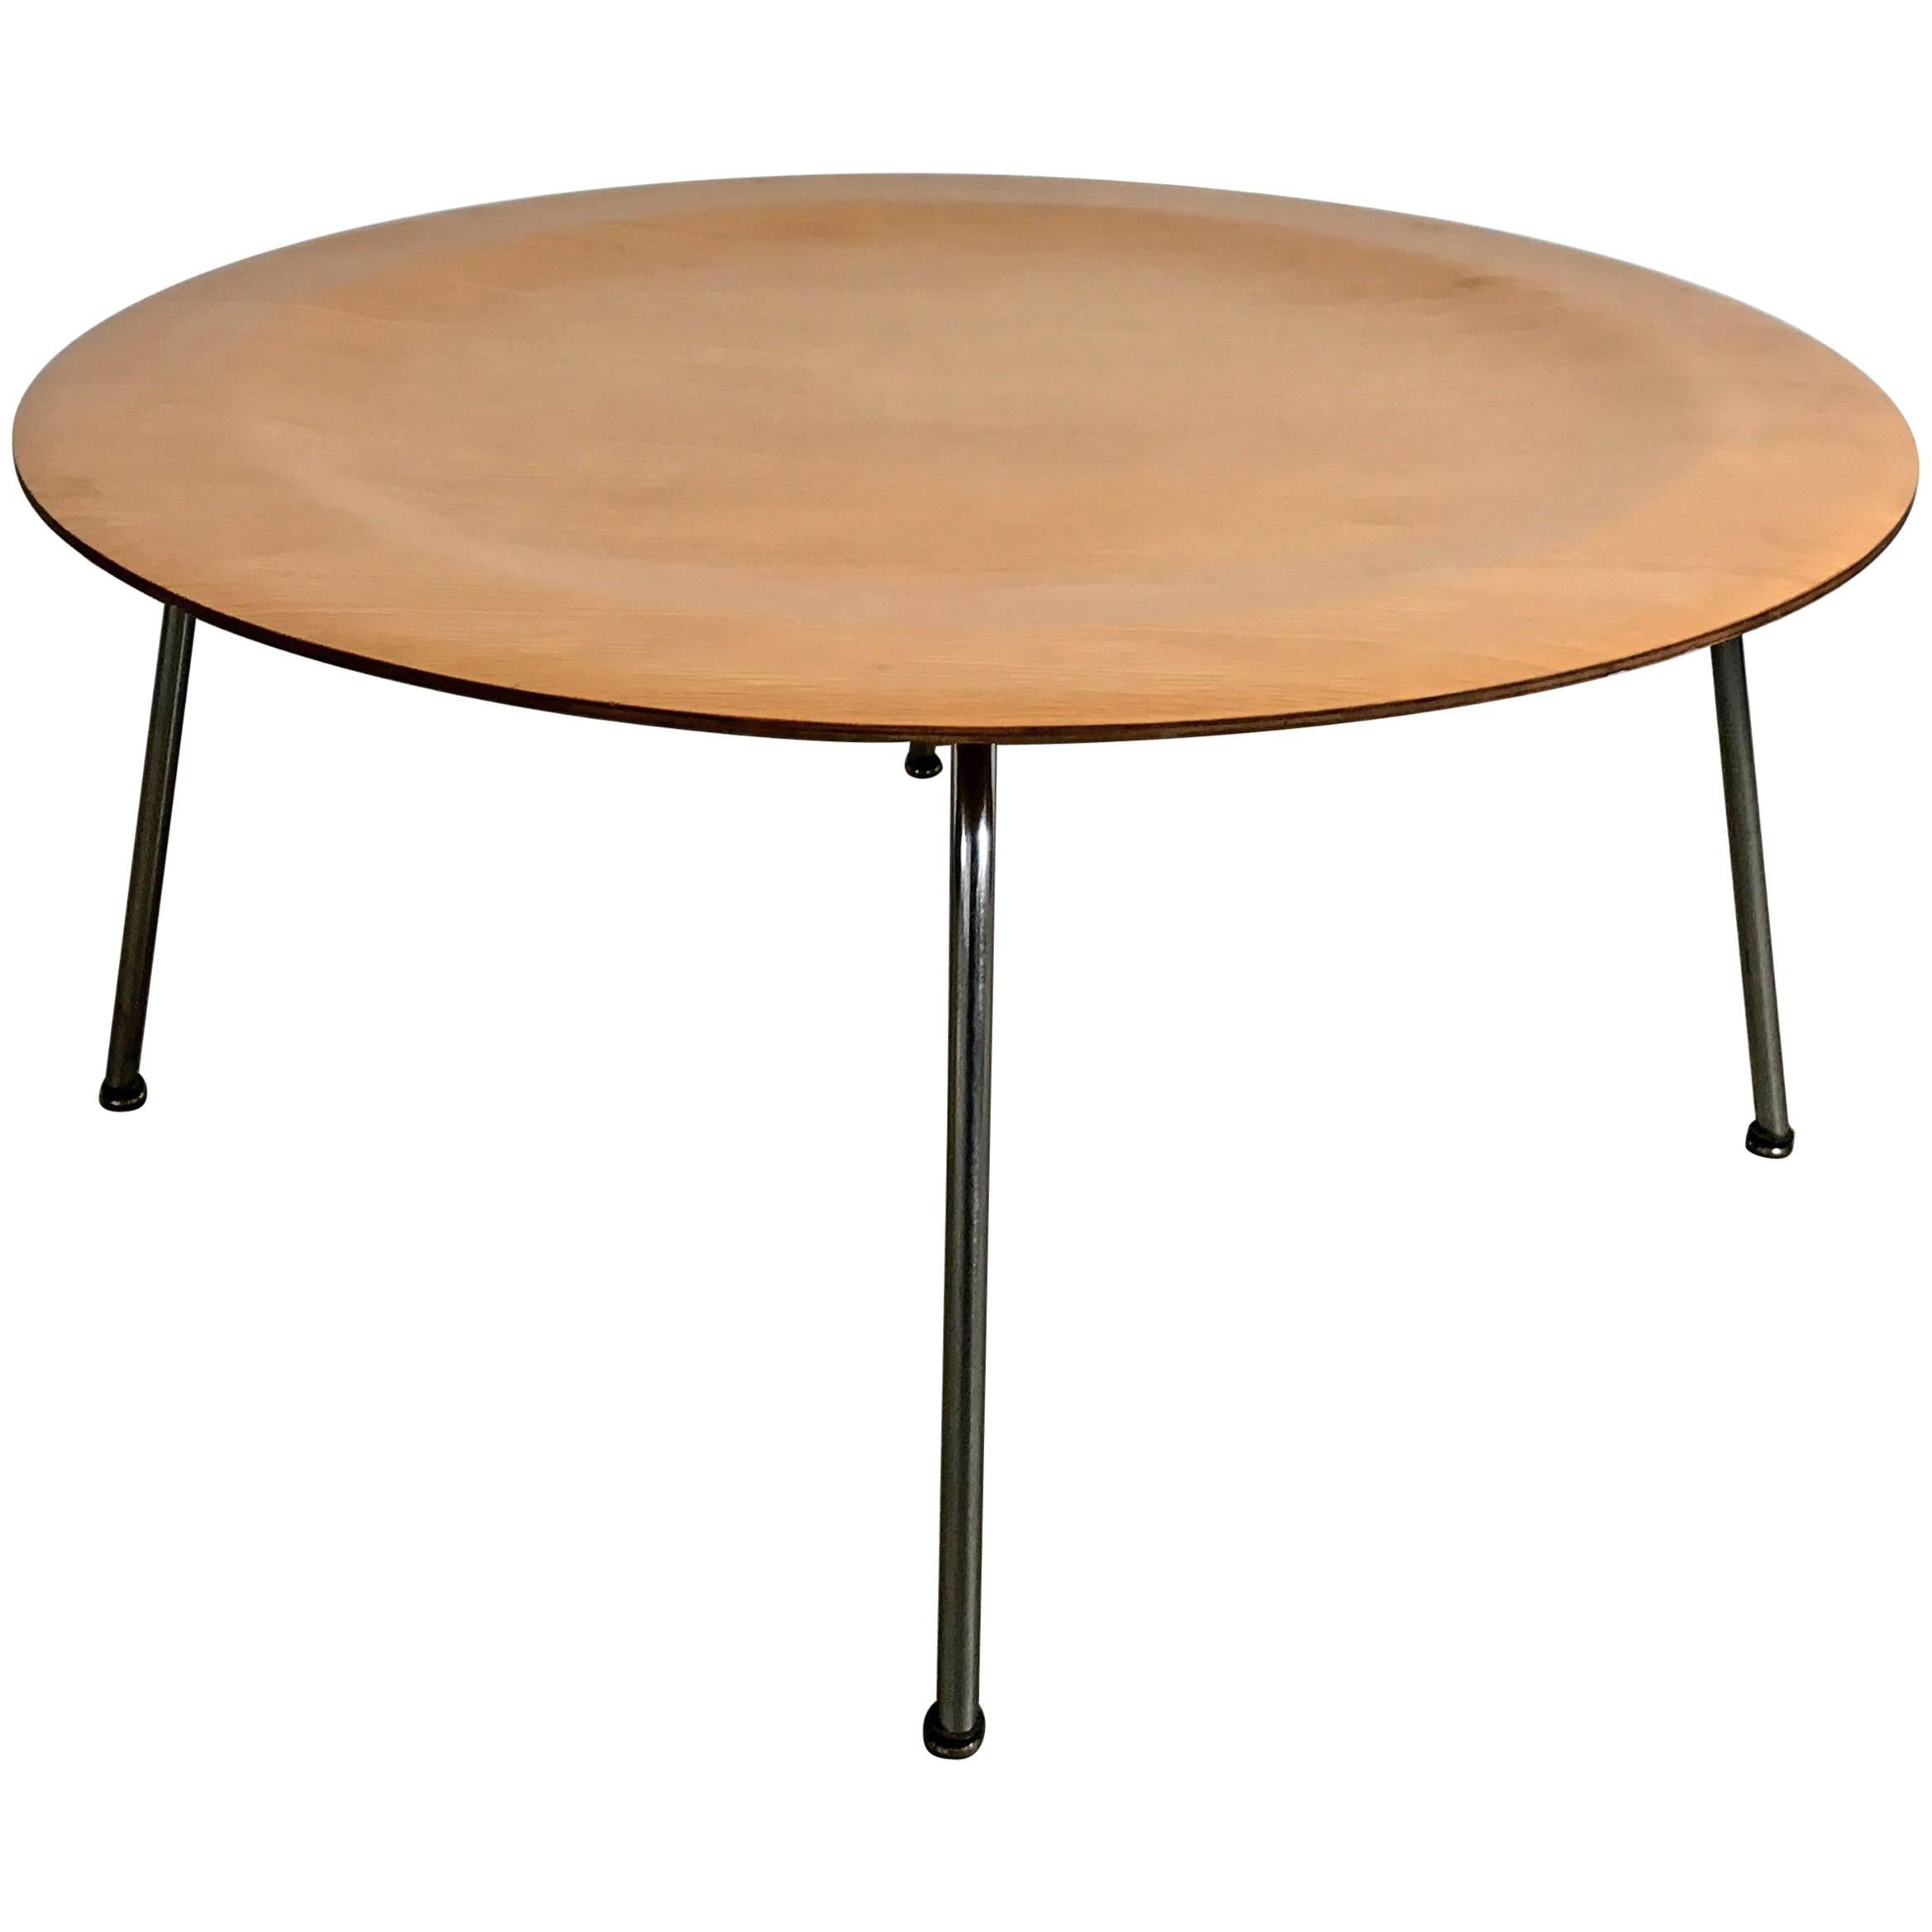 Classic Mid-Century Modern Birch Plywood Coffee Table, Charles Eames